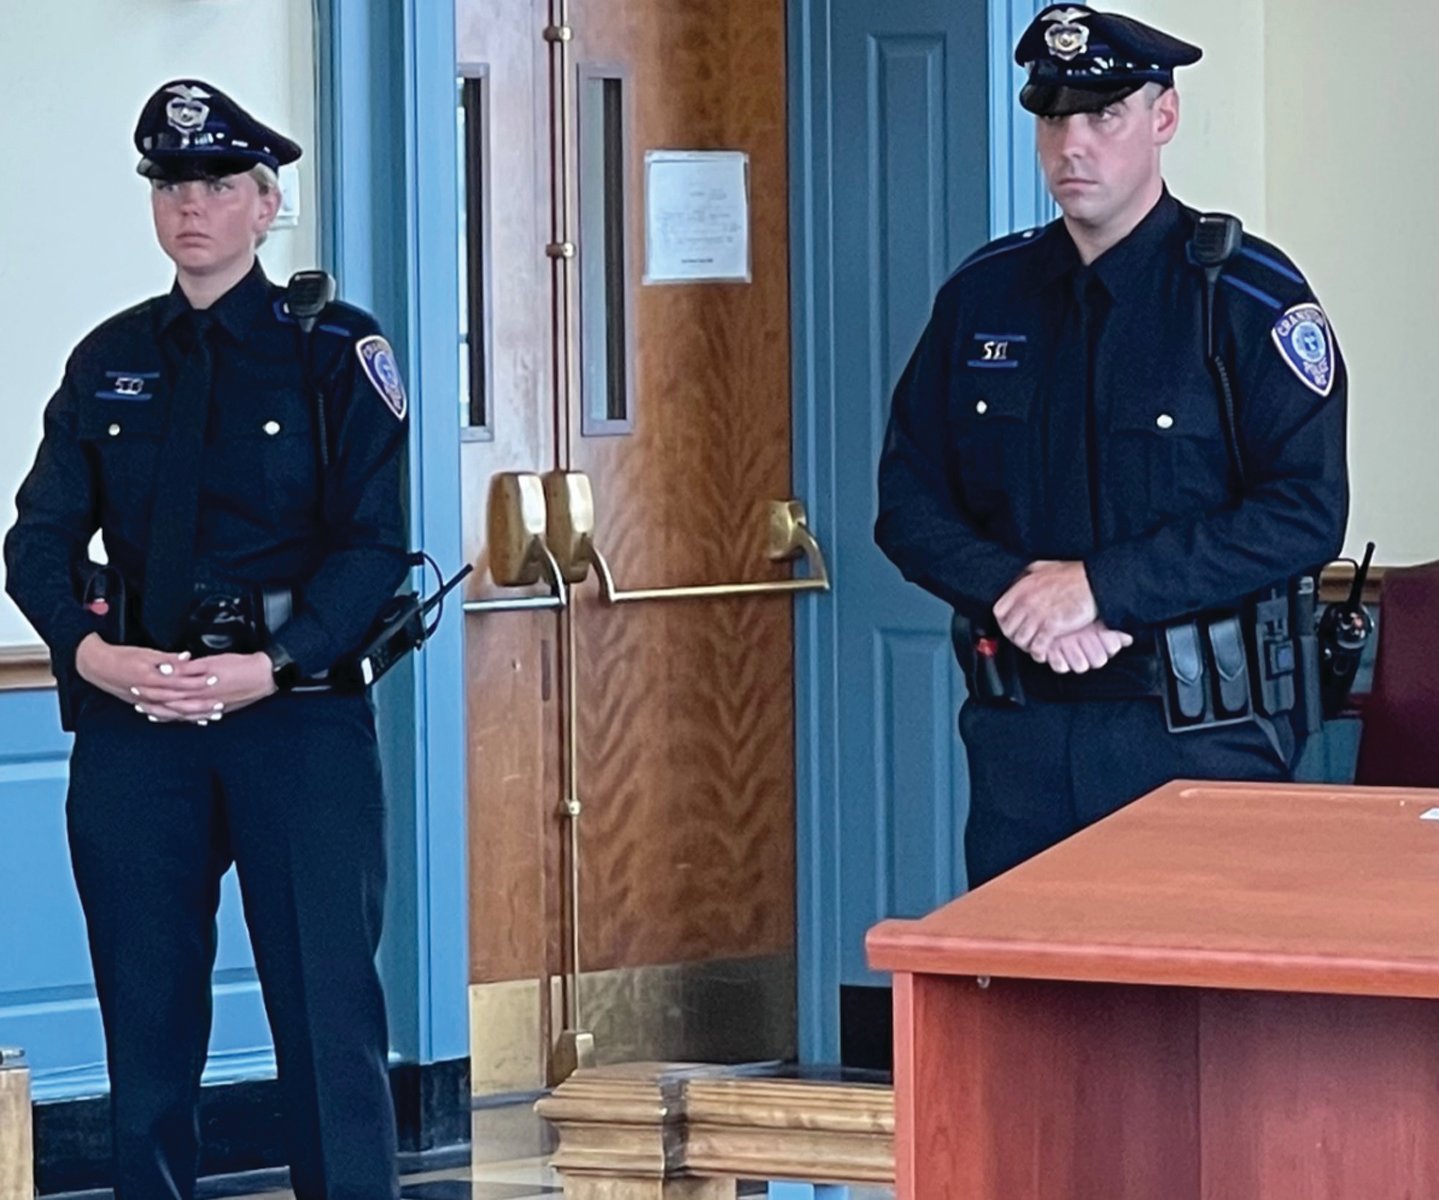 JOINING THE RANKS: Officers Kayleigh Cooper, left, and Brian Brothers were sworn in as members of the Cranston Police Department during a ceremony held last week at City Hall.